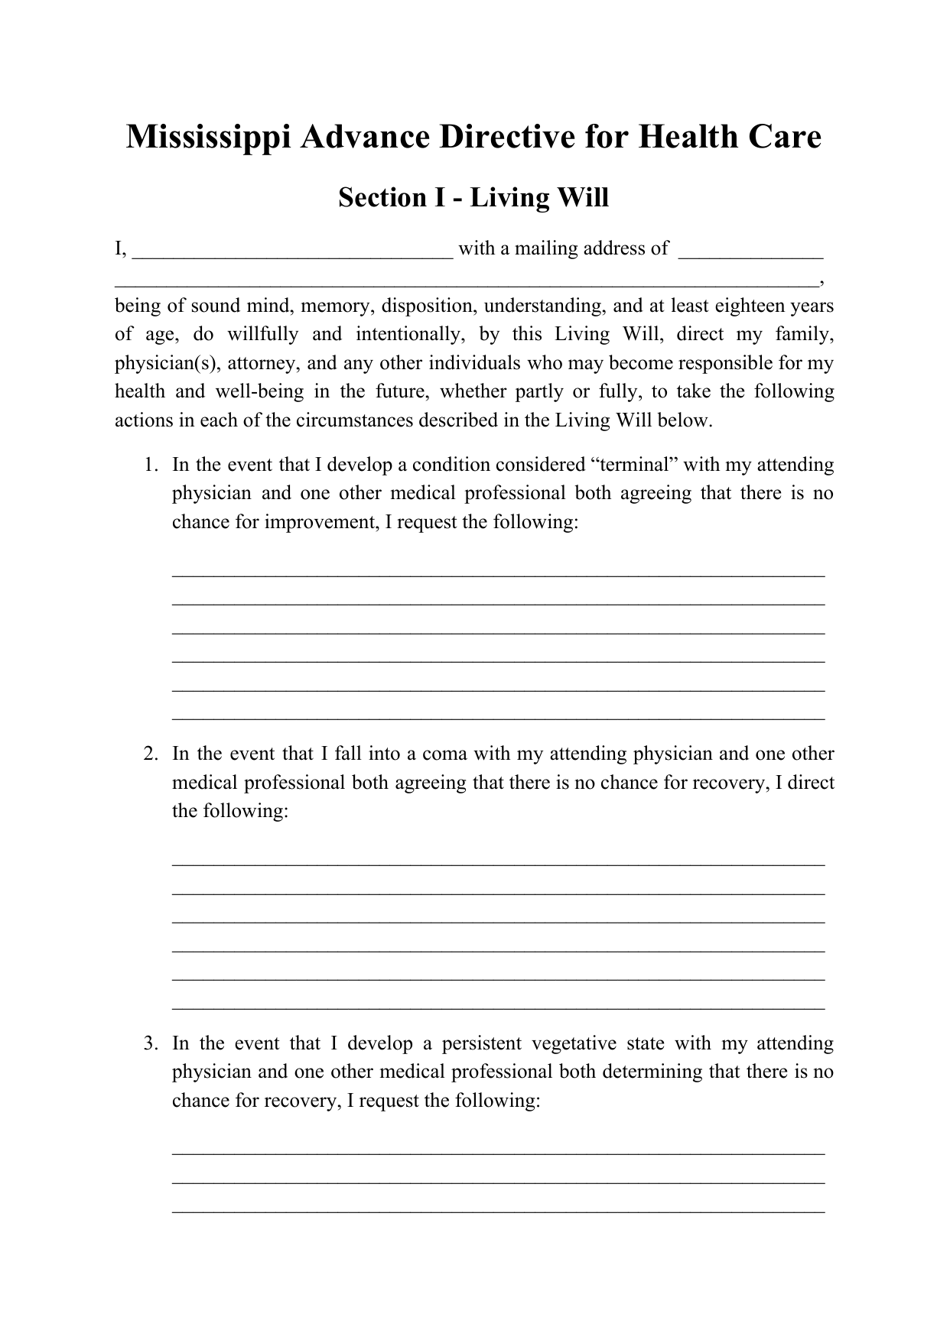 Advance Directive for Health Care Form - Mississippi, Page 1